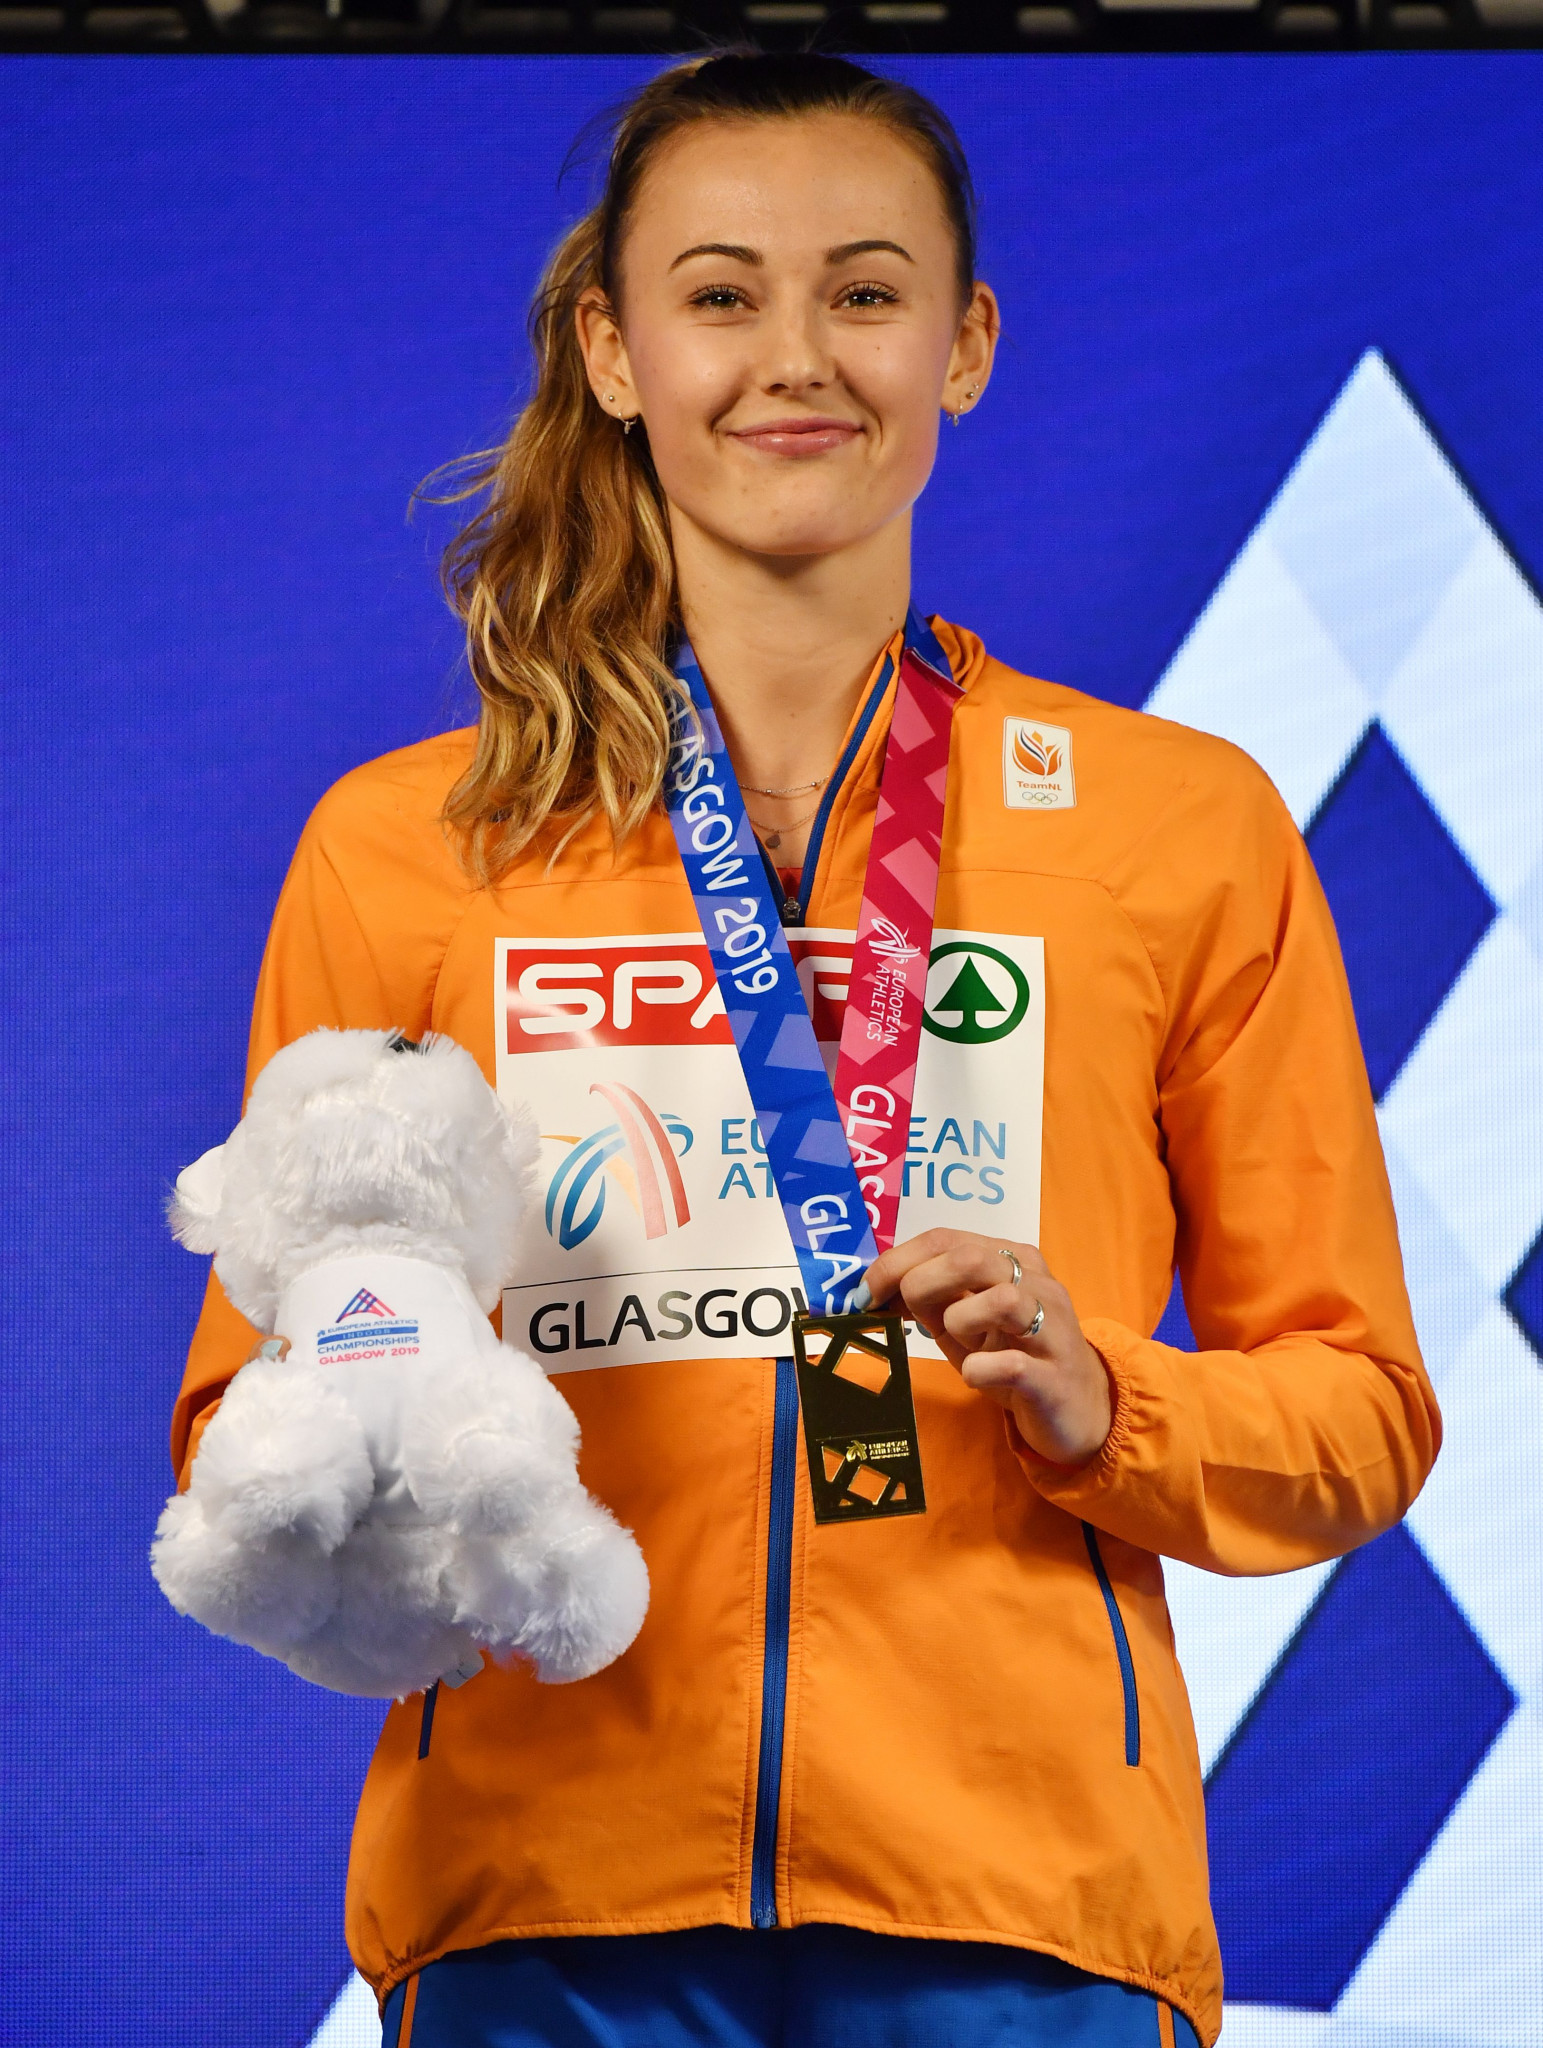 Netherlands' Nadine Visser poses on the podium after winning gold in the women's 60m hurdles at the 2019 European Indoor Athletics Championships in Glasgow ©GSA 